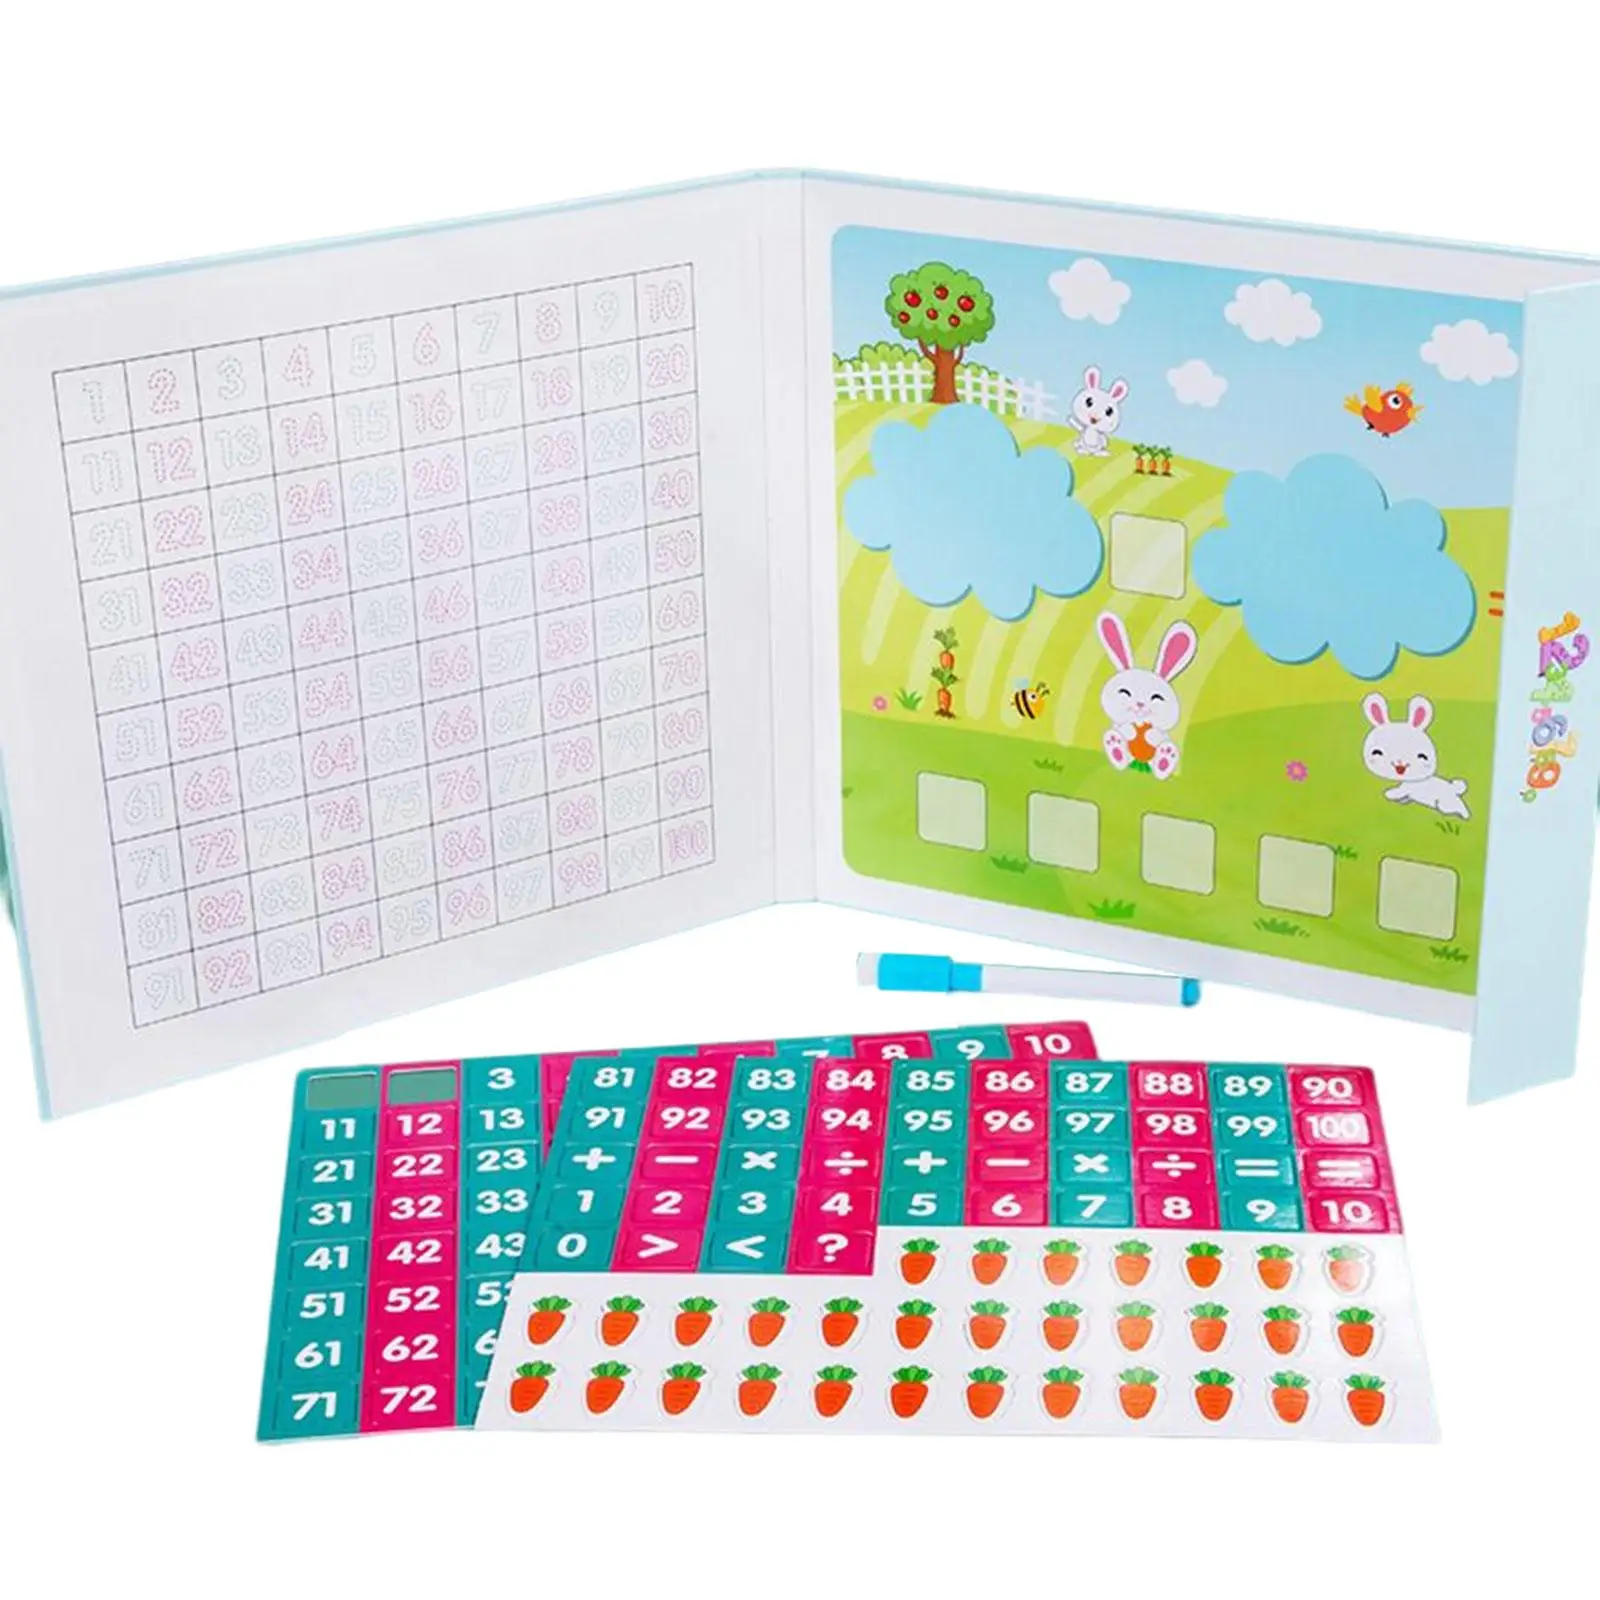 

100 Number Board Number Counting Toys Addition Subtraction Math Manipulatives Board Math Counting Game for Gift Preshcool Home